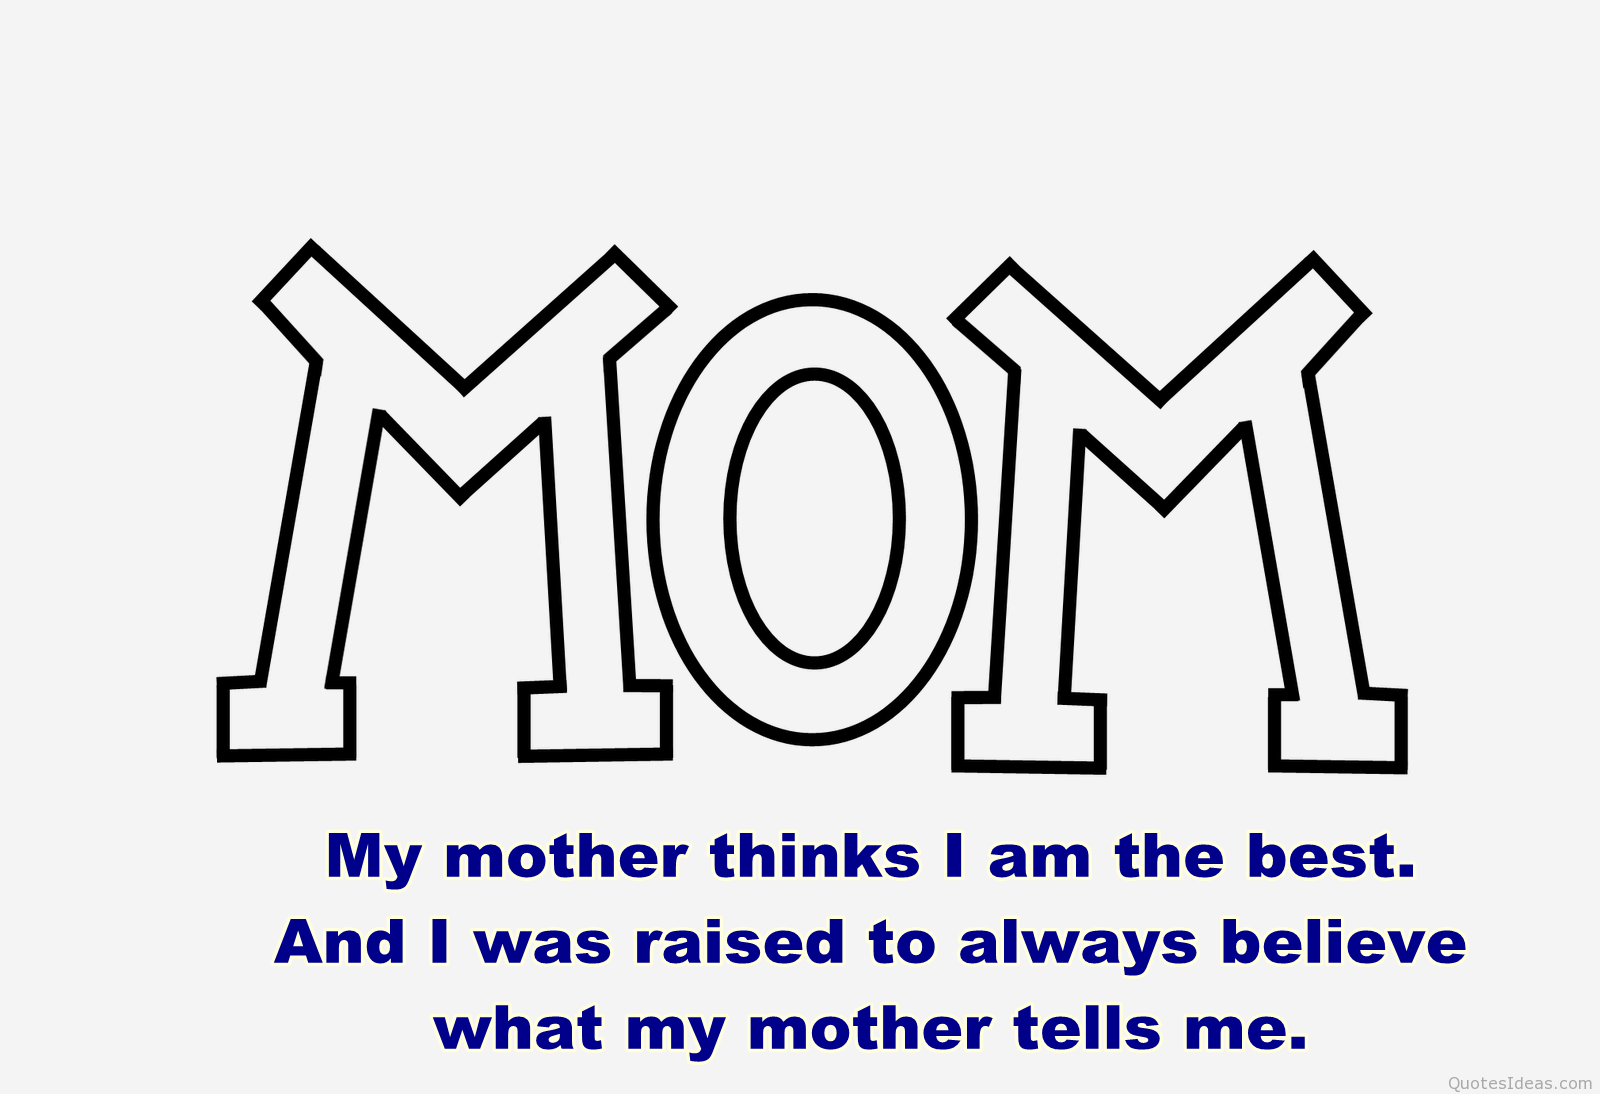 Mom Hd Wallpaper Quote - United States Department Of Agriculture - HD Wallpaper 